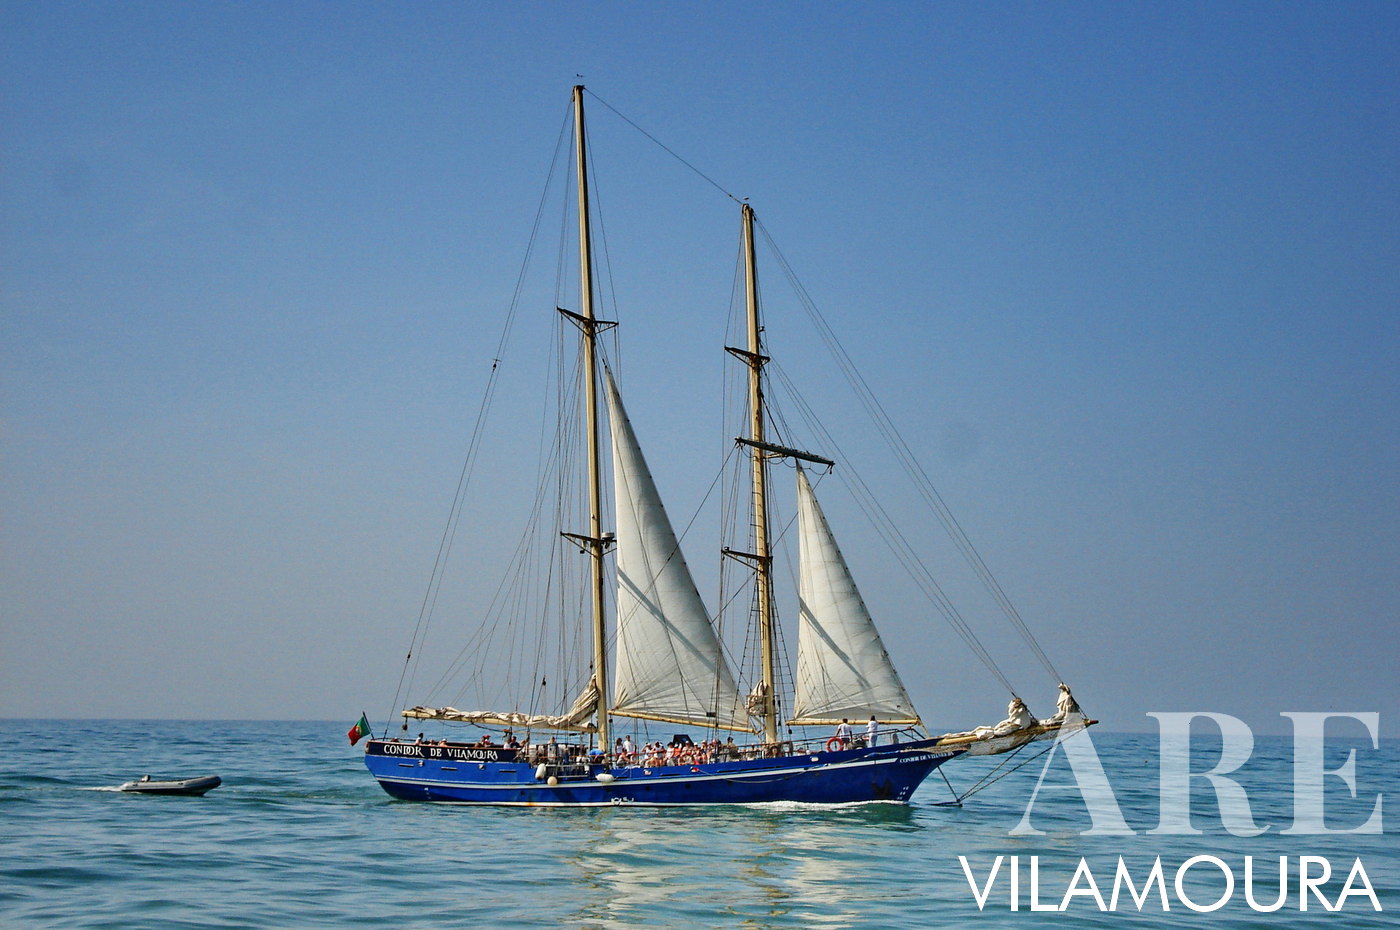 Condor de Vilamoura, sailing ship best known for the tours of the coastline of the Algarve